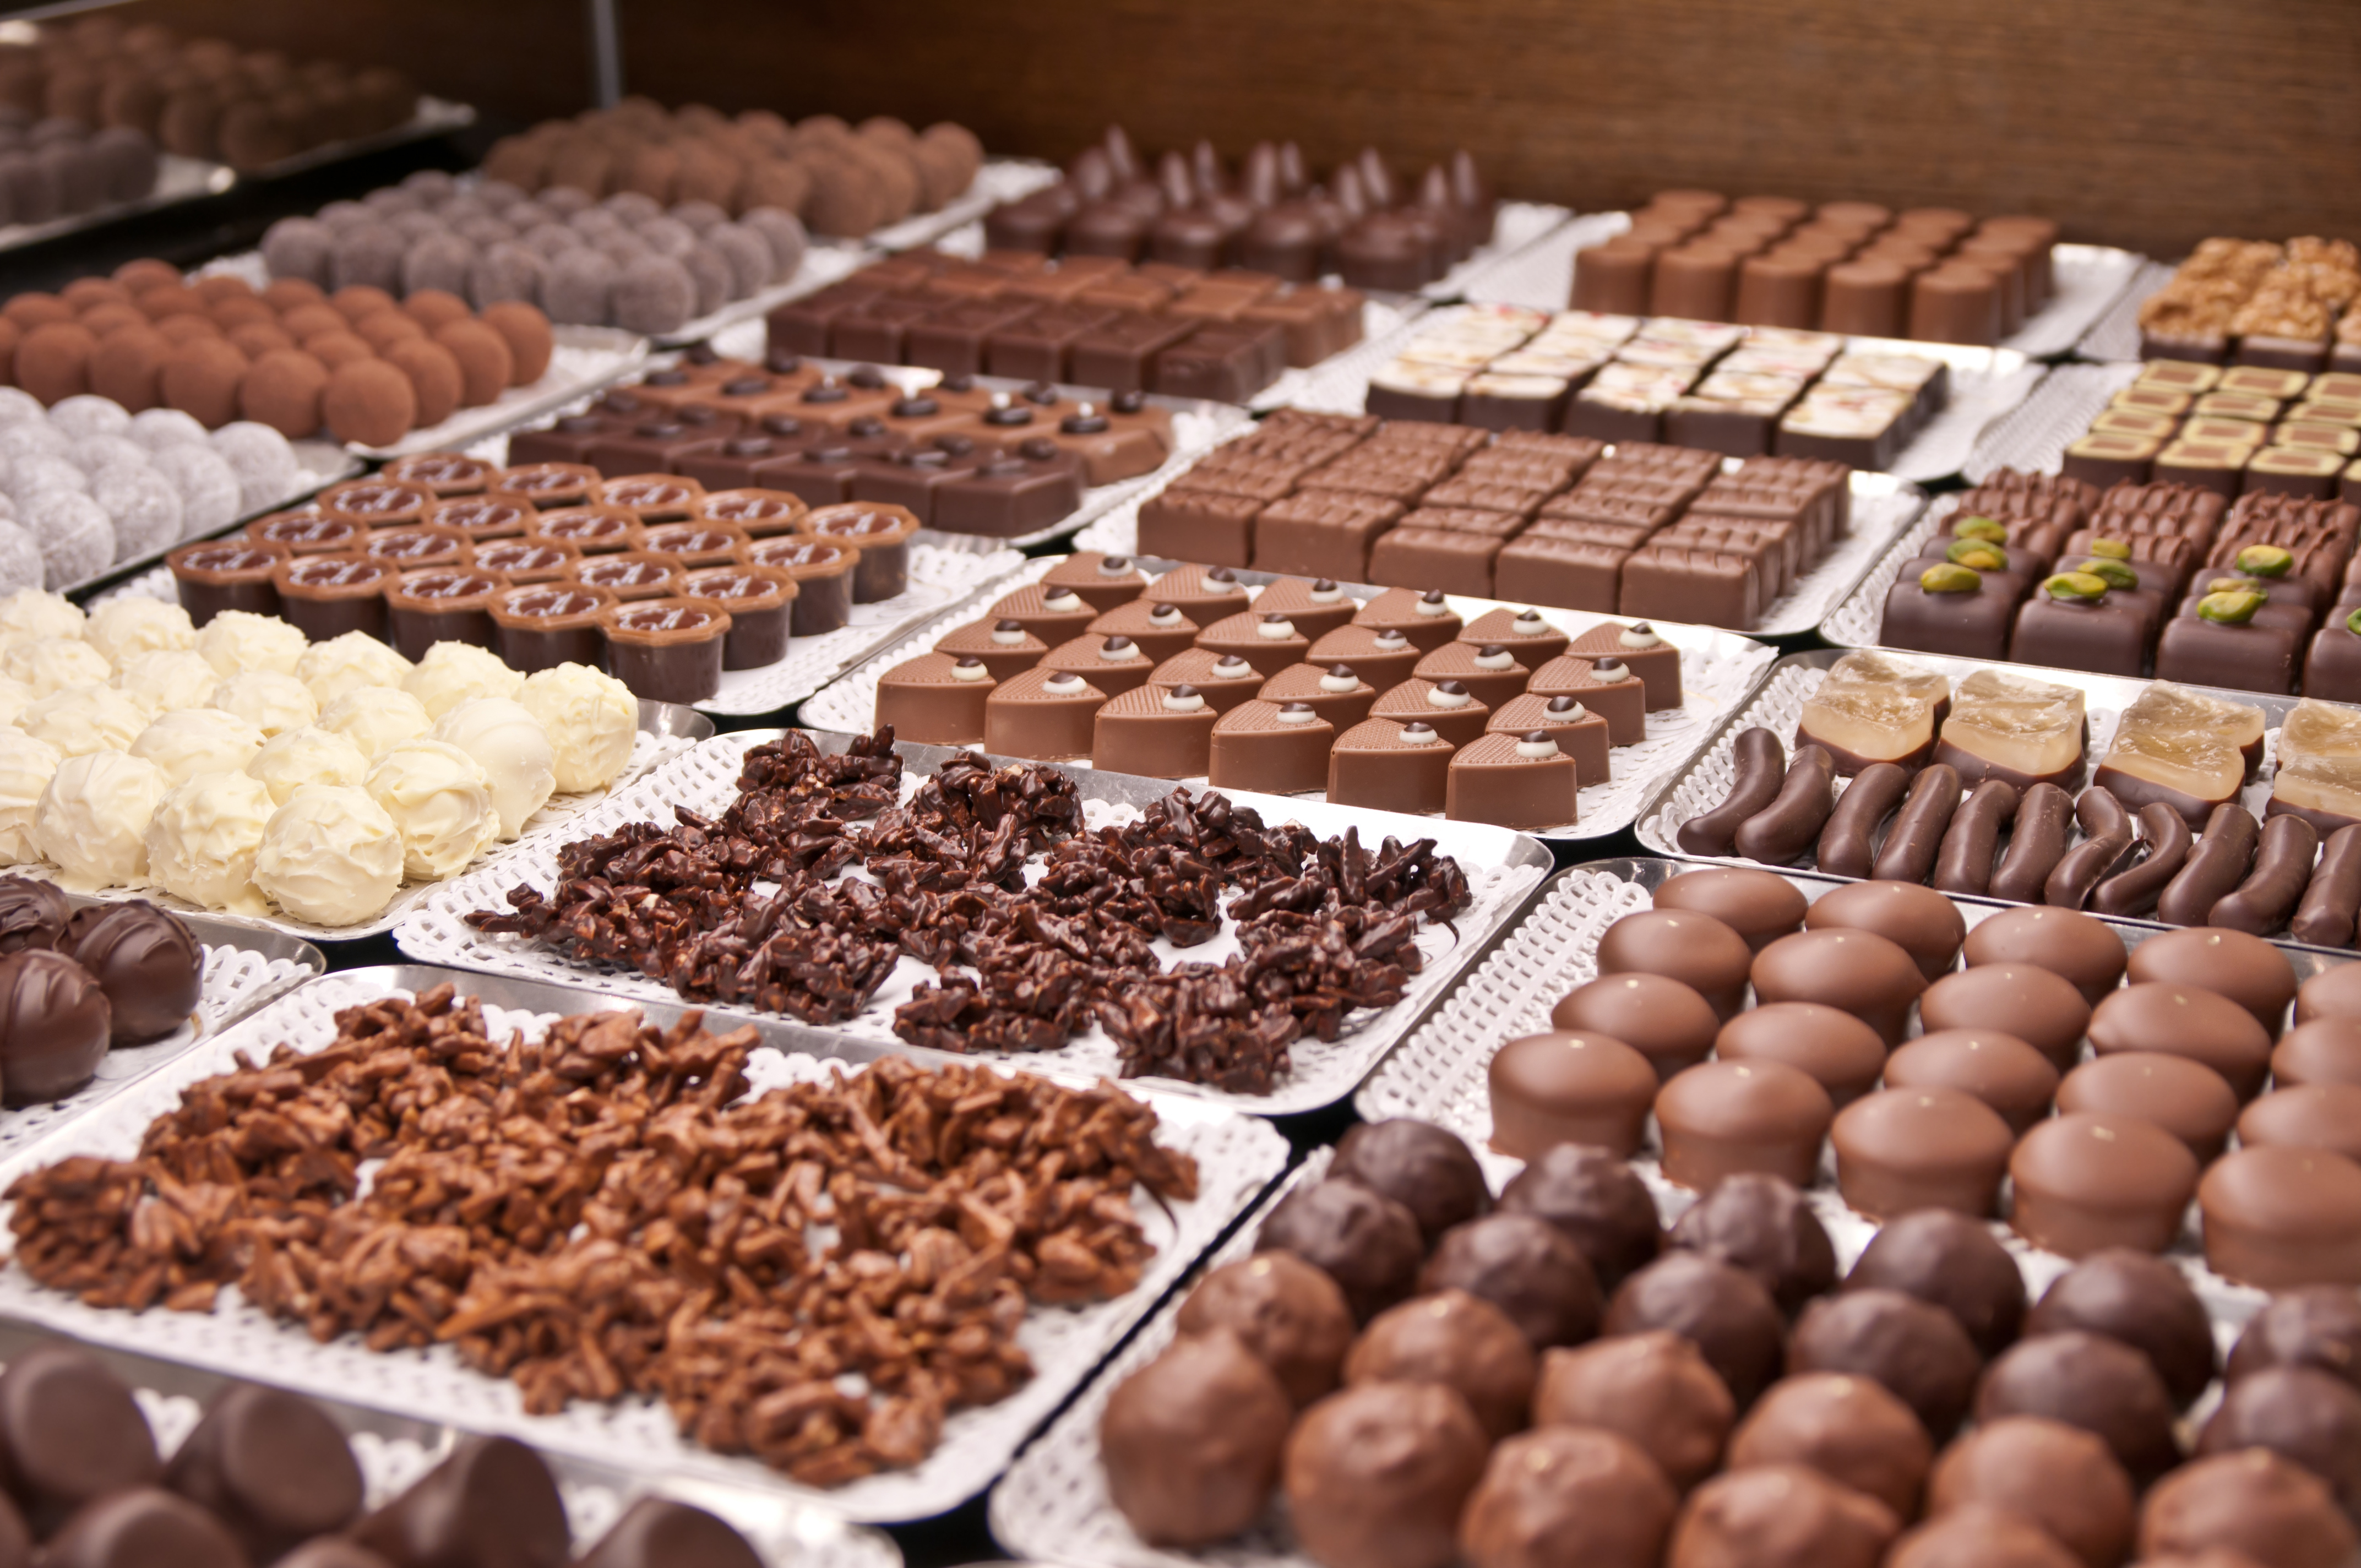 Chocolate tours take in the city's many chocolatiers